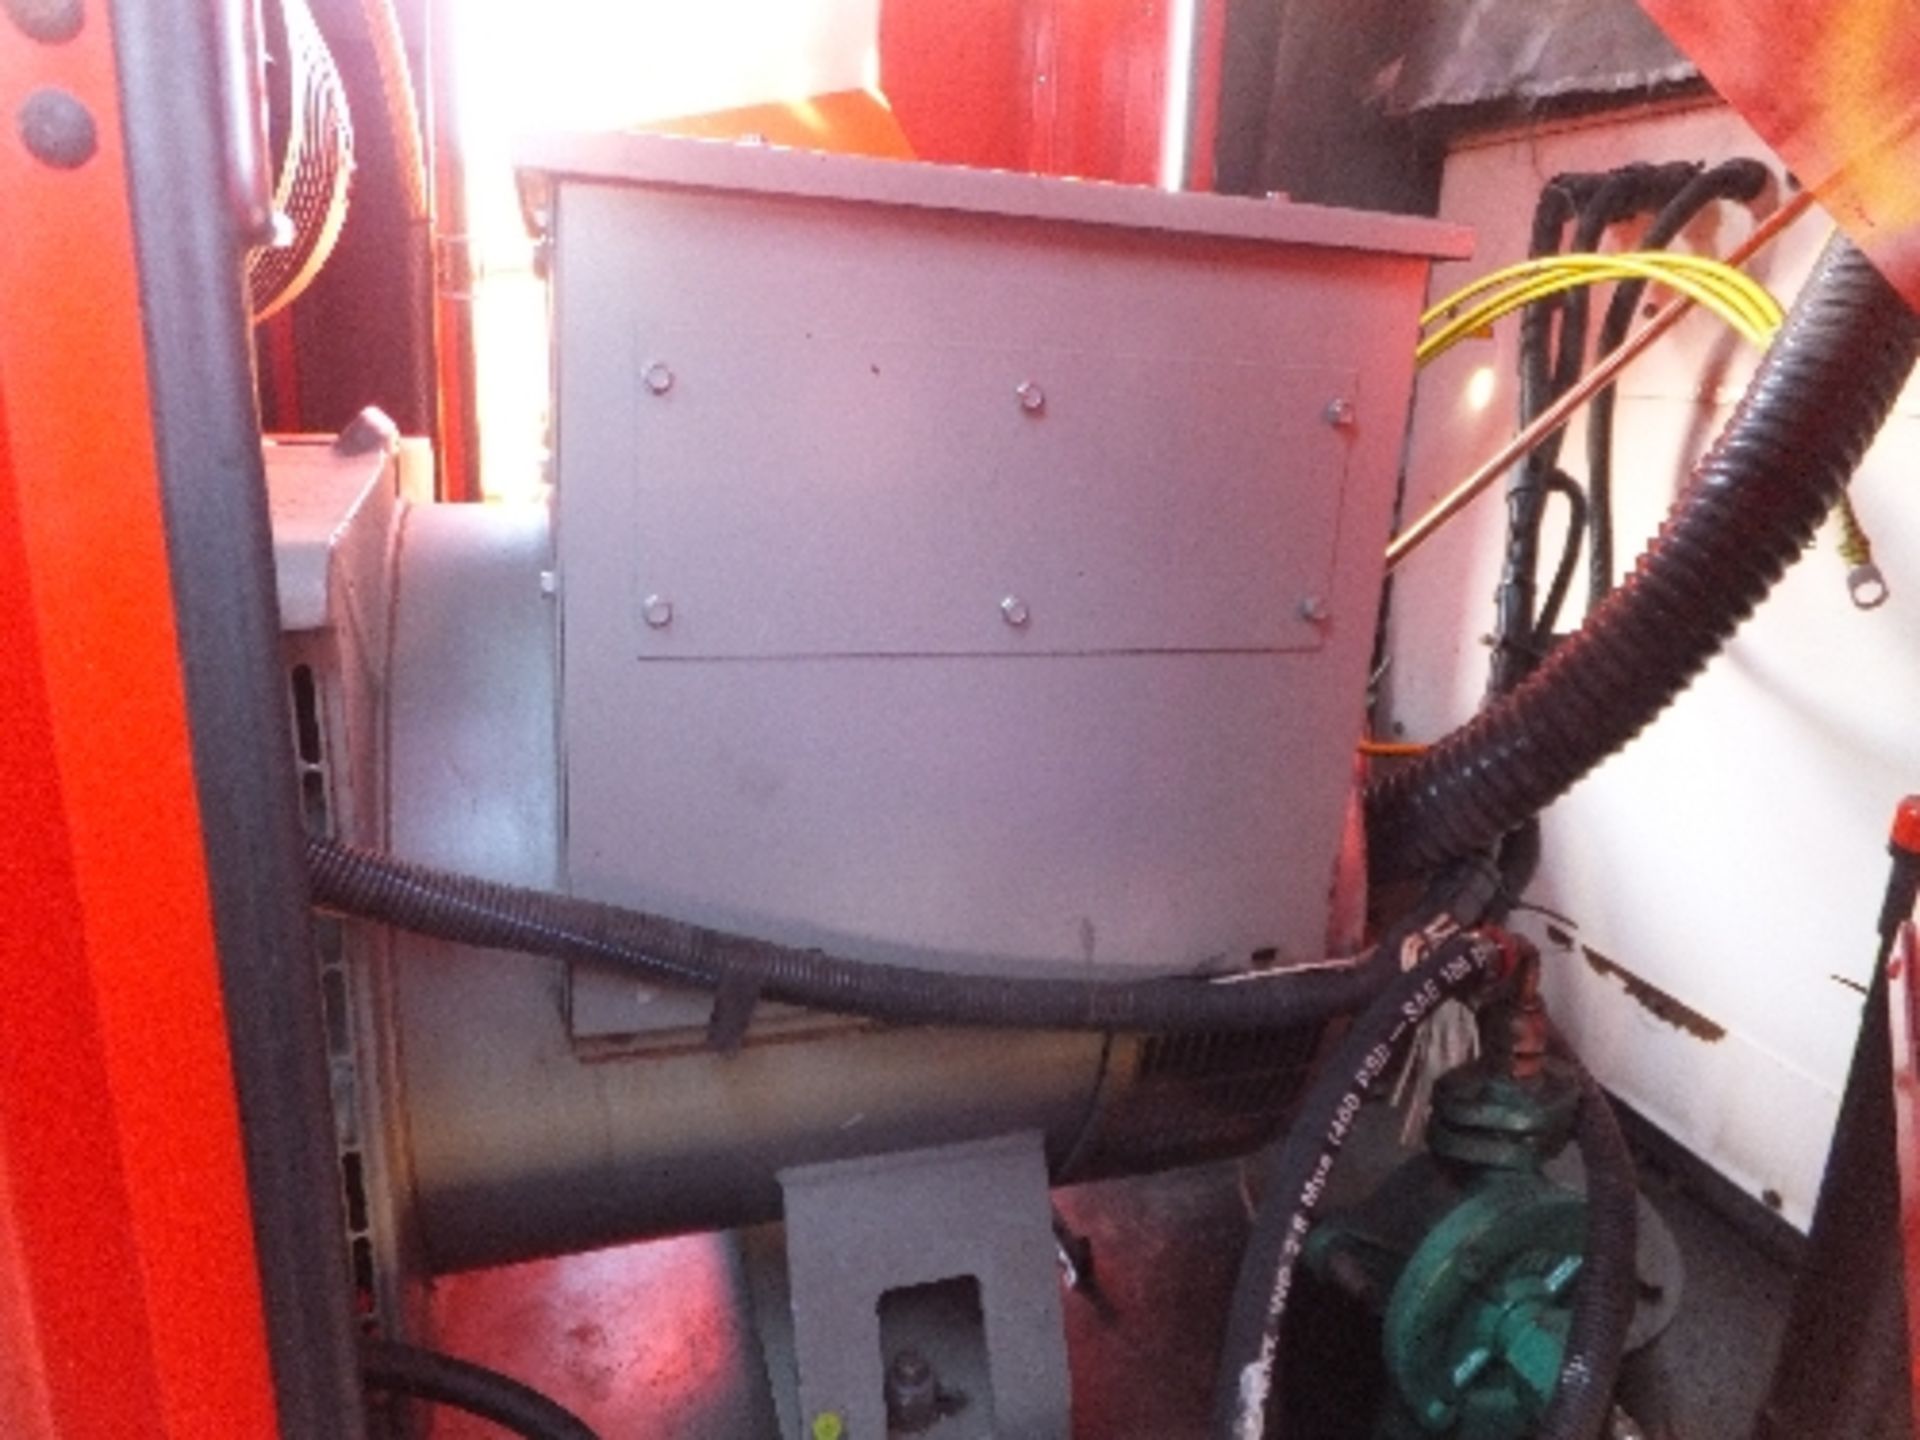 Wilson Perkins 100kva generator  1978 hrs this lot is sold on instruction of Speedy - Image 3 of 7